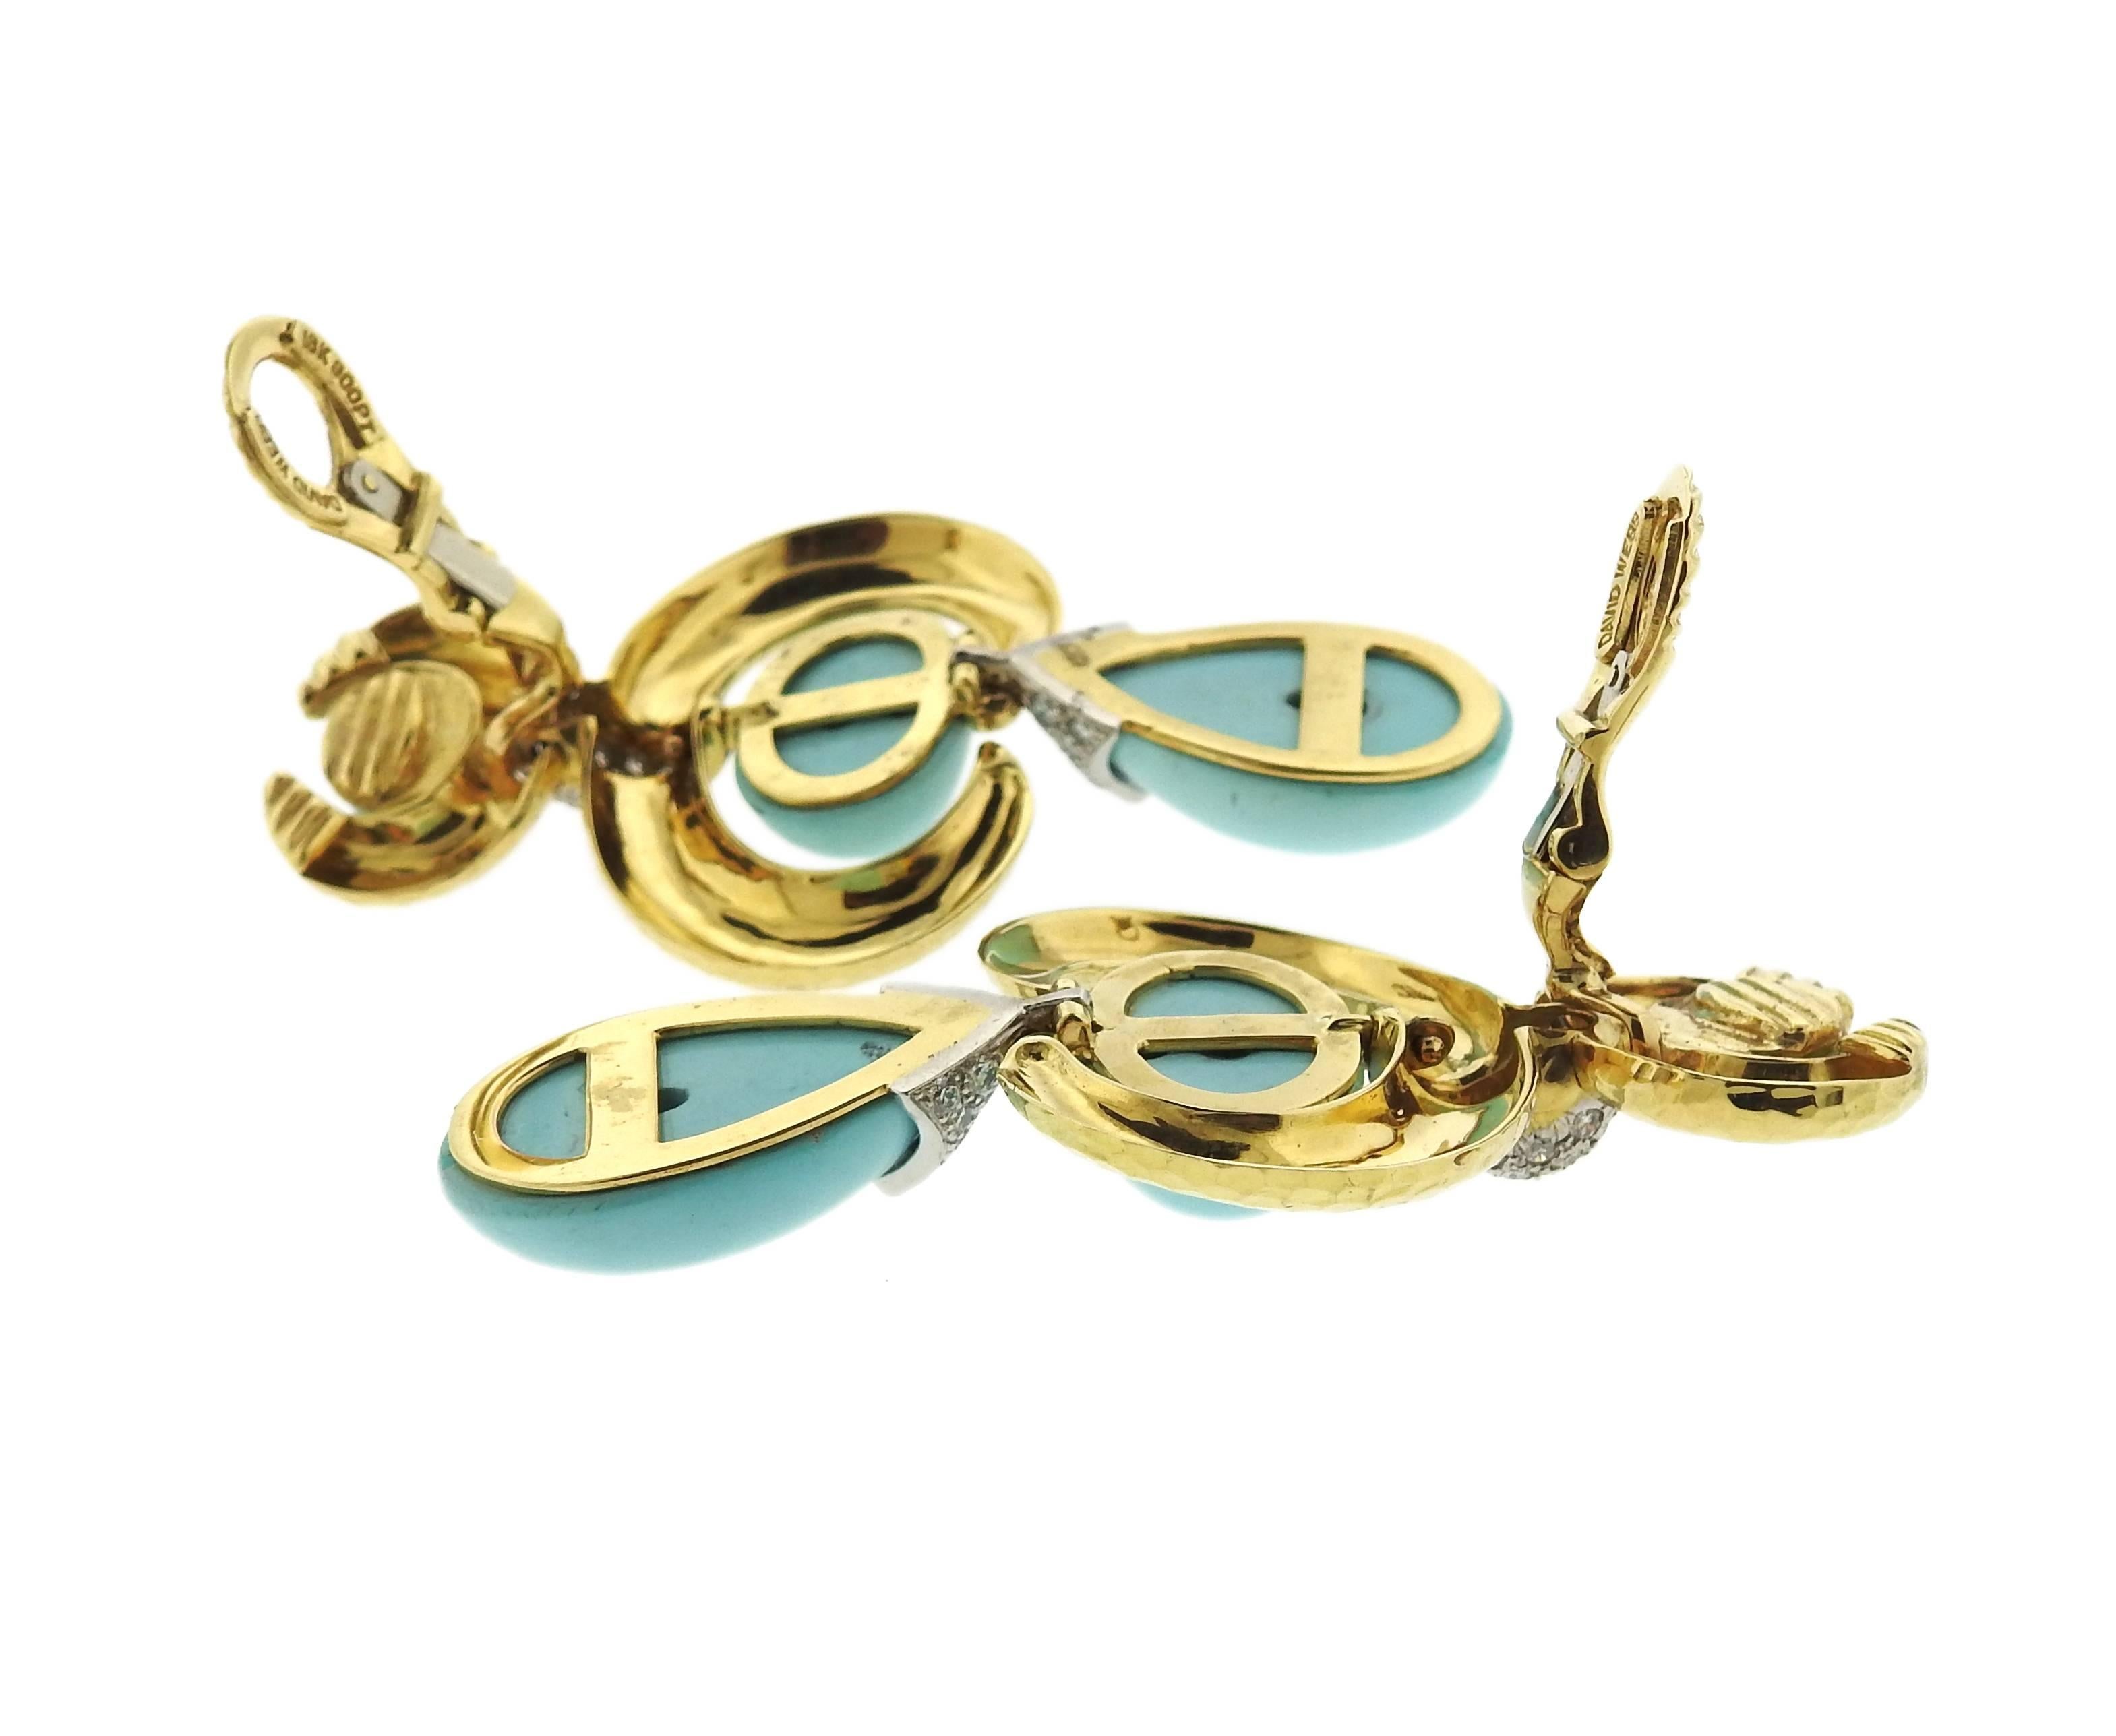 A pair of long drop earrings, crafted by David Webb, set in 18k hammered gold and platinum, decorated with turquoise and approximately 2.24ctw in diamonds. Earrings measure 70mm long x 40mm at widest points. Marked: pt900,18k, David Webb. Weight -